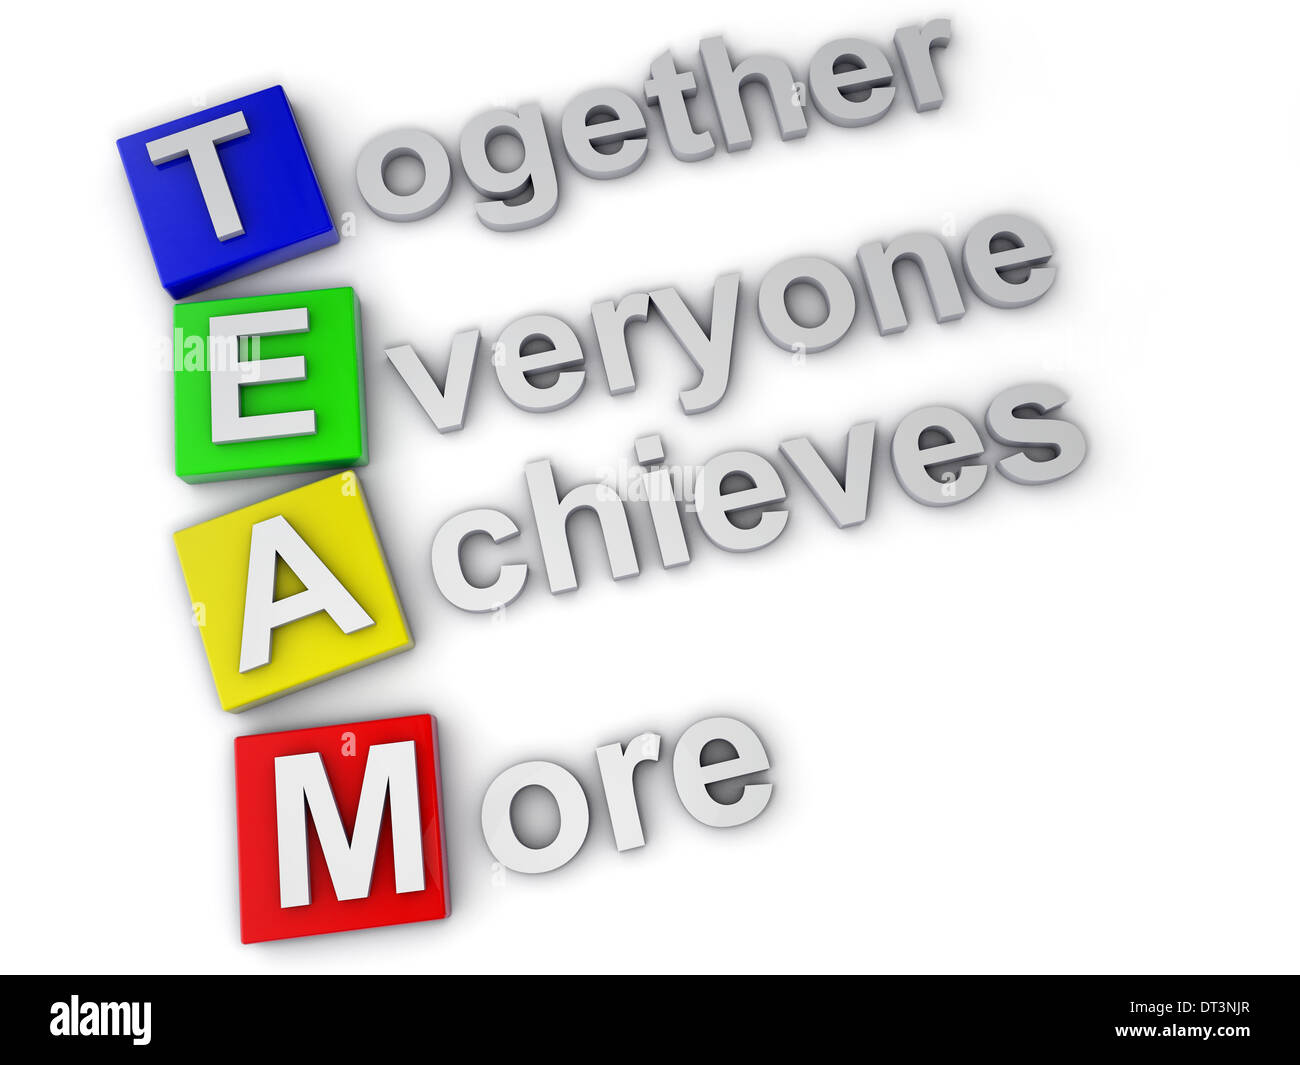 Team, Together everyone achieves more Stock Photo